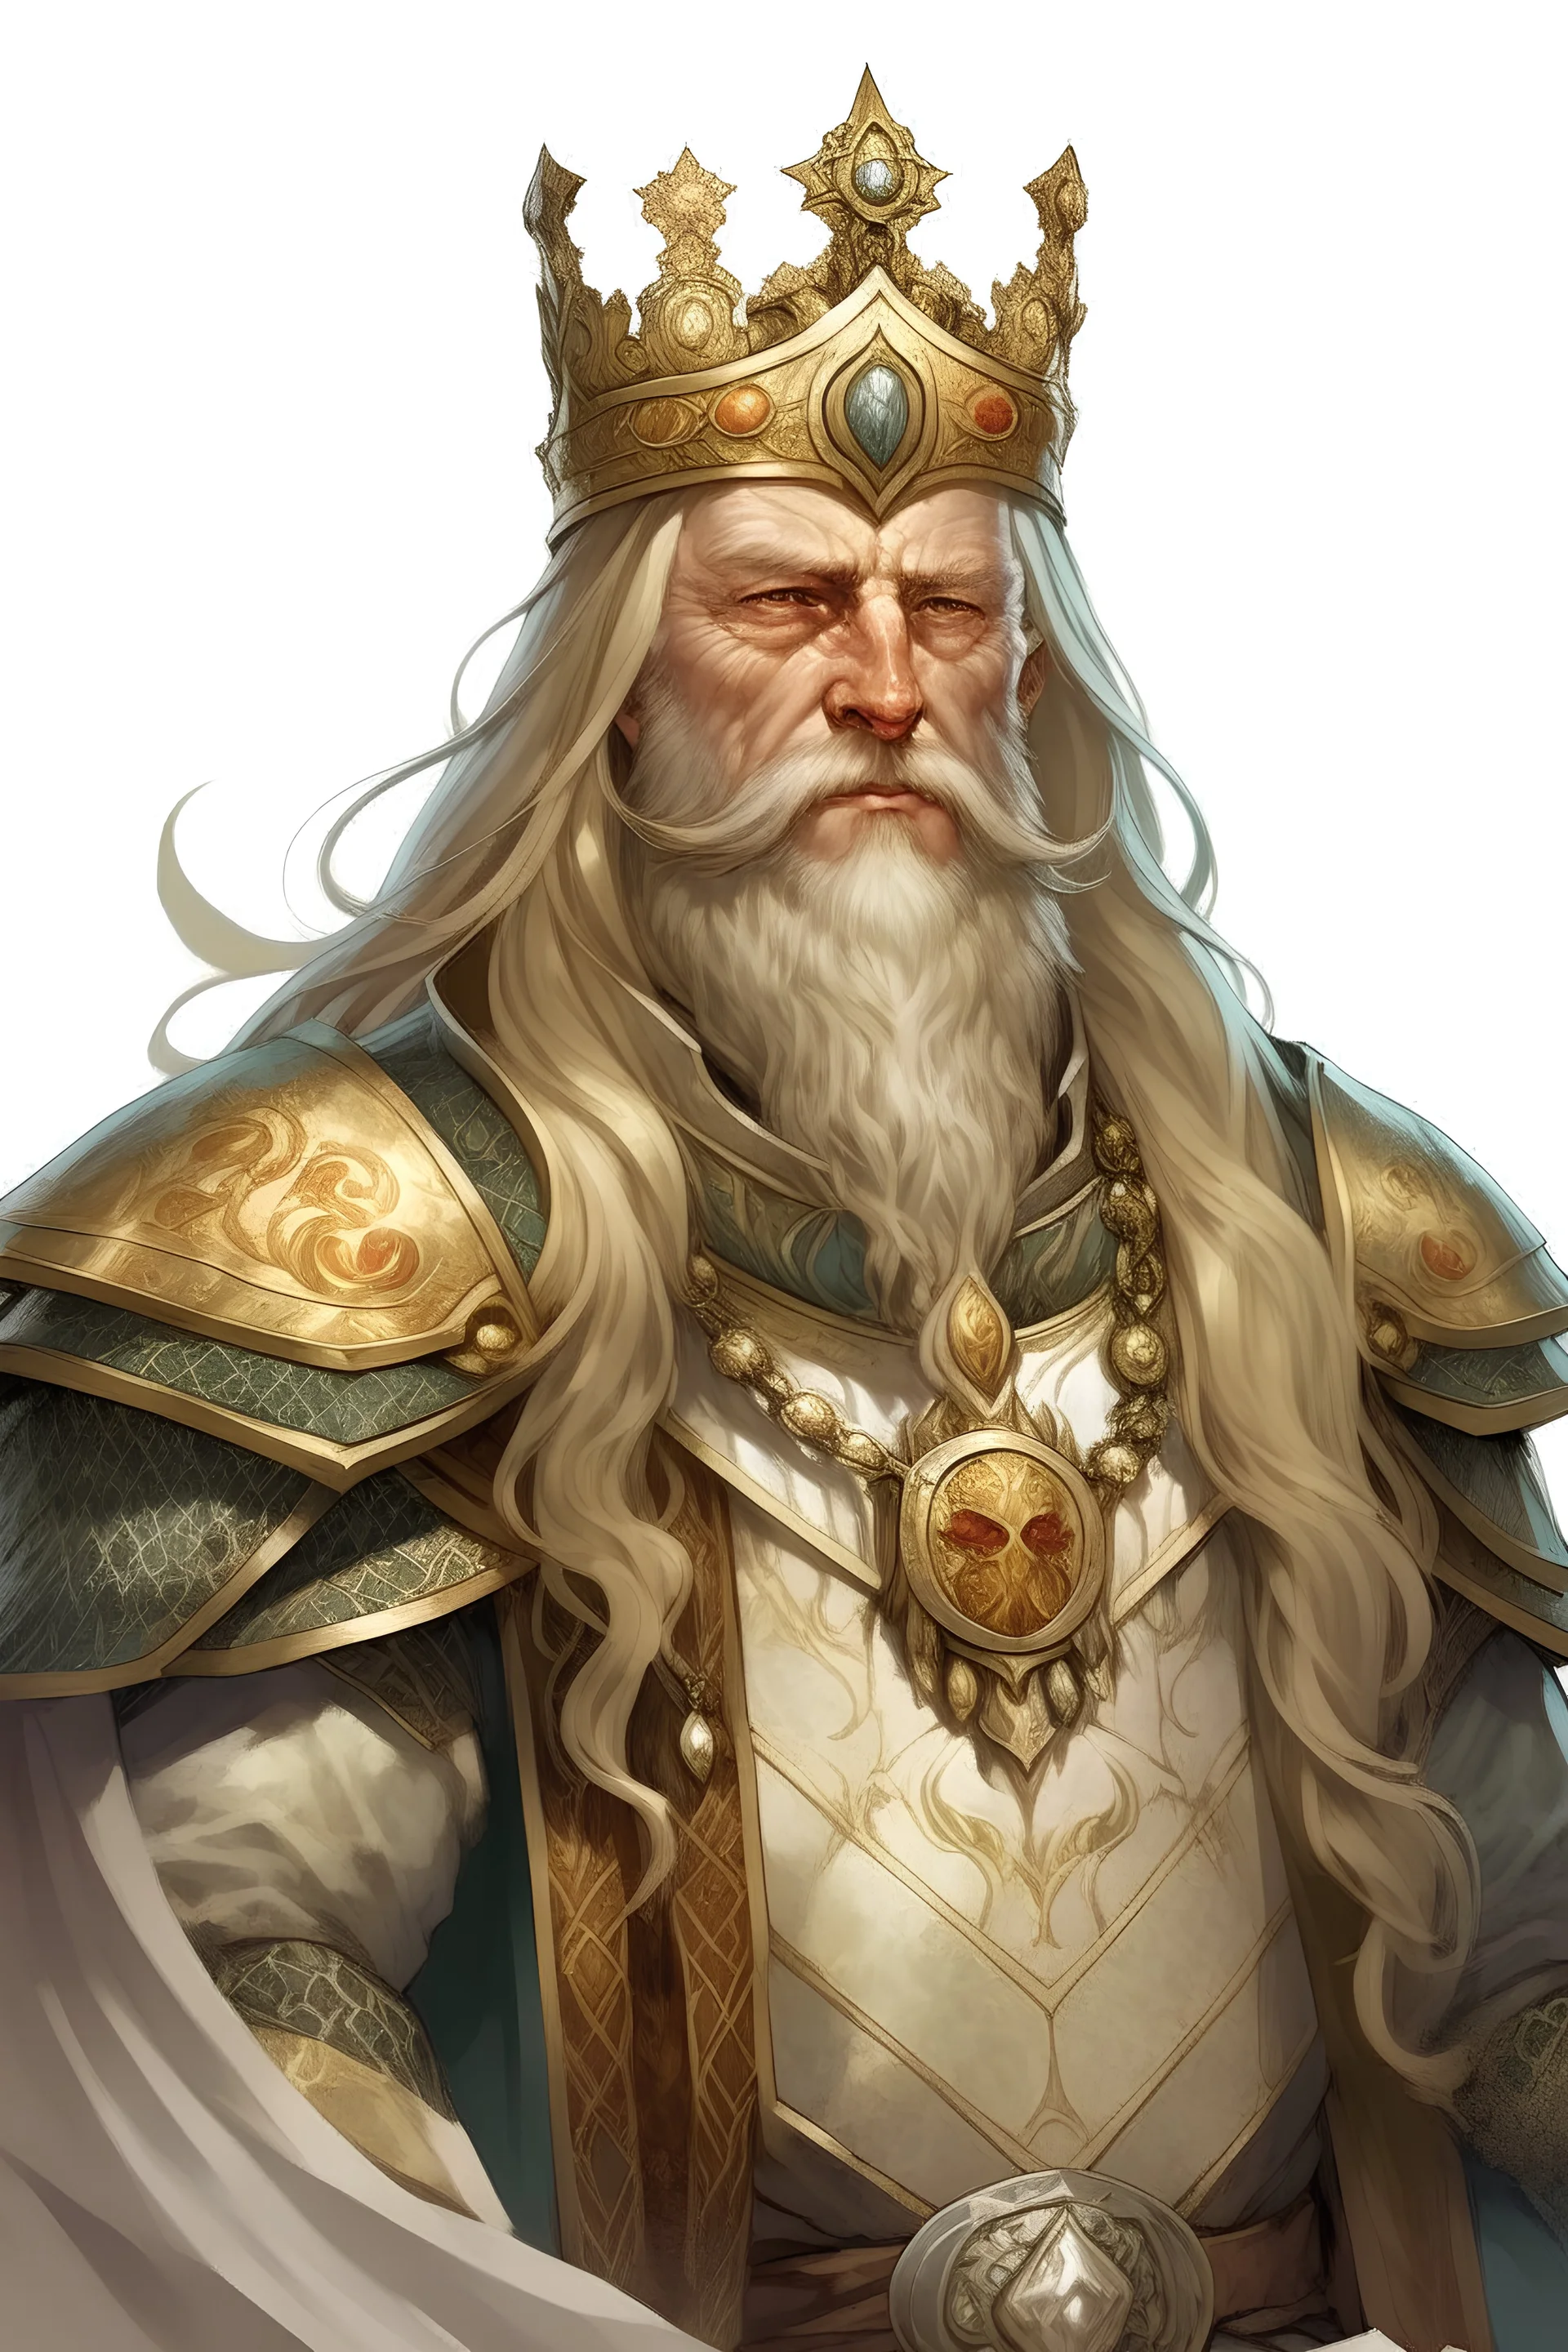 Generate me a male D&D character who is an old king wearing elaborate armor. They have long pale blonde hair and a short beard, along with old skin. And a crown, The background should be a white